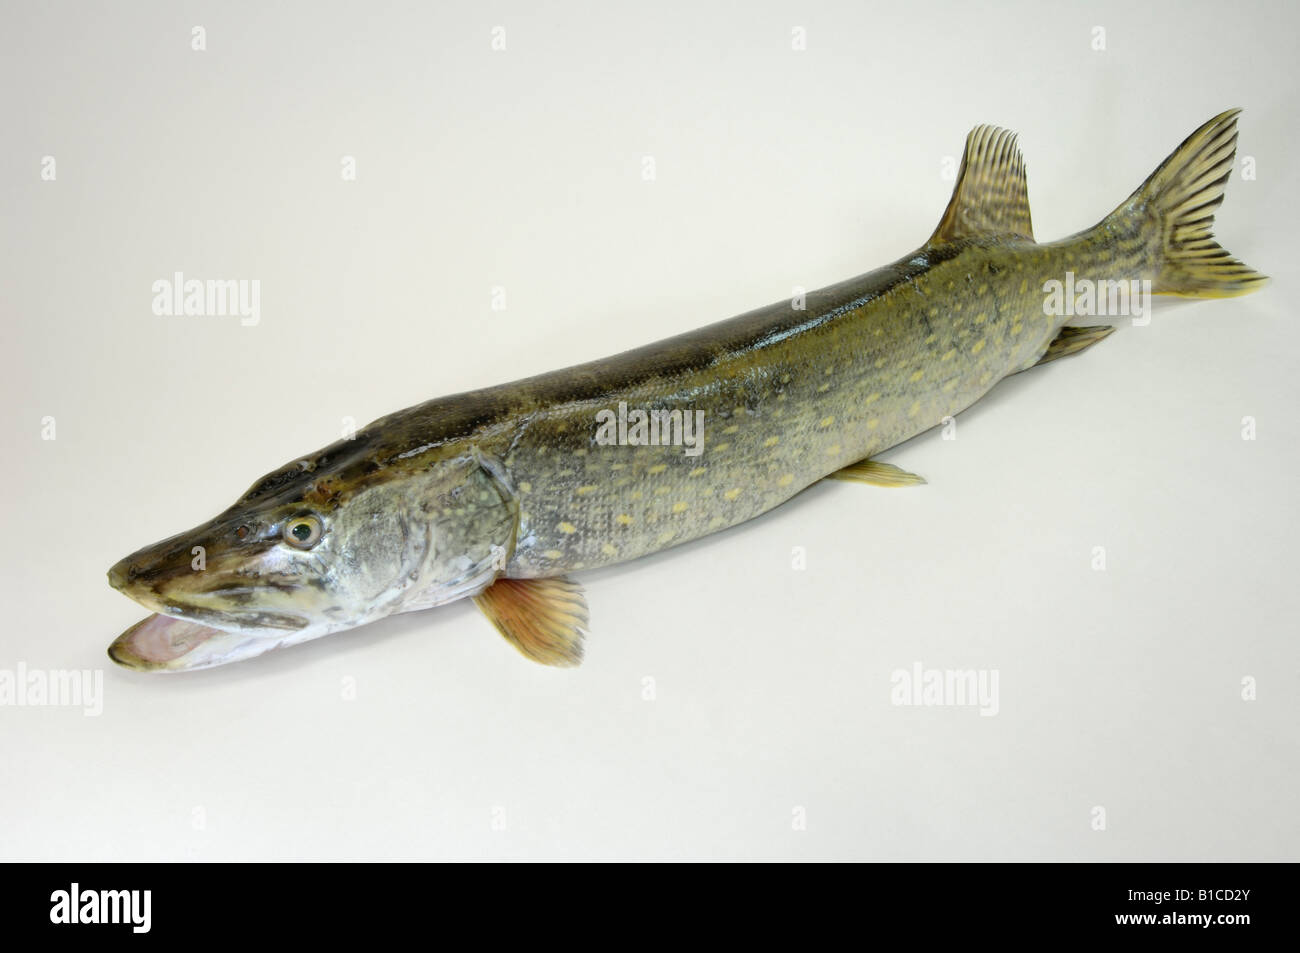 Pike, Northern Pike (Esox lucius), studio picture Stock Photo